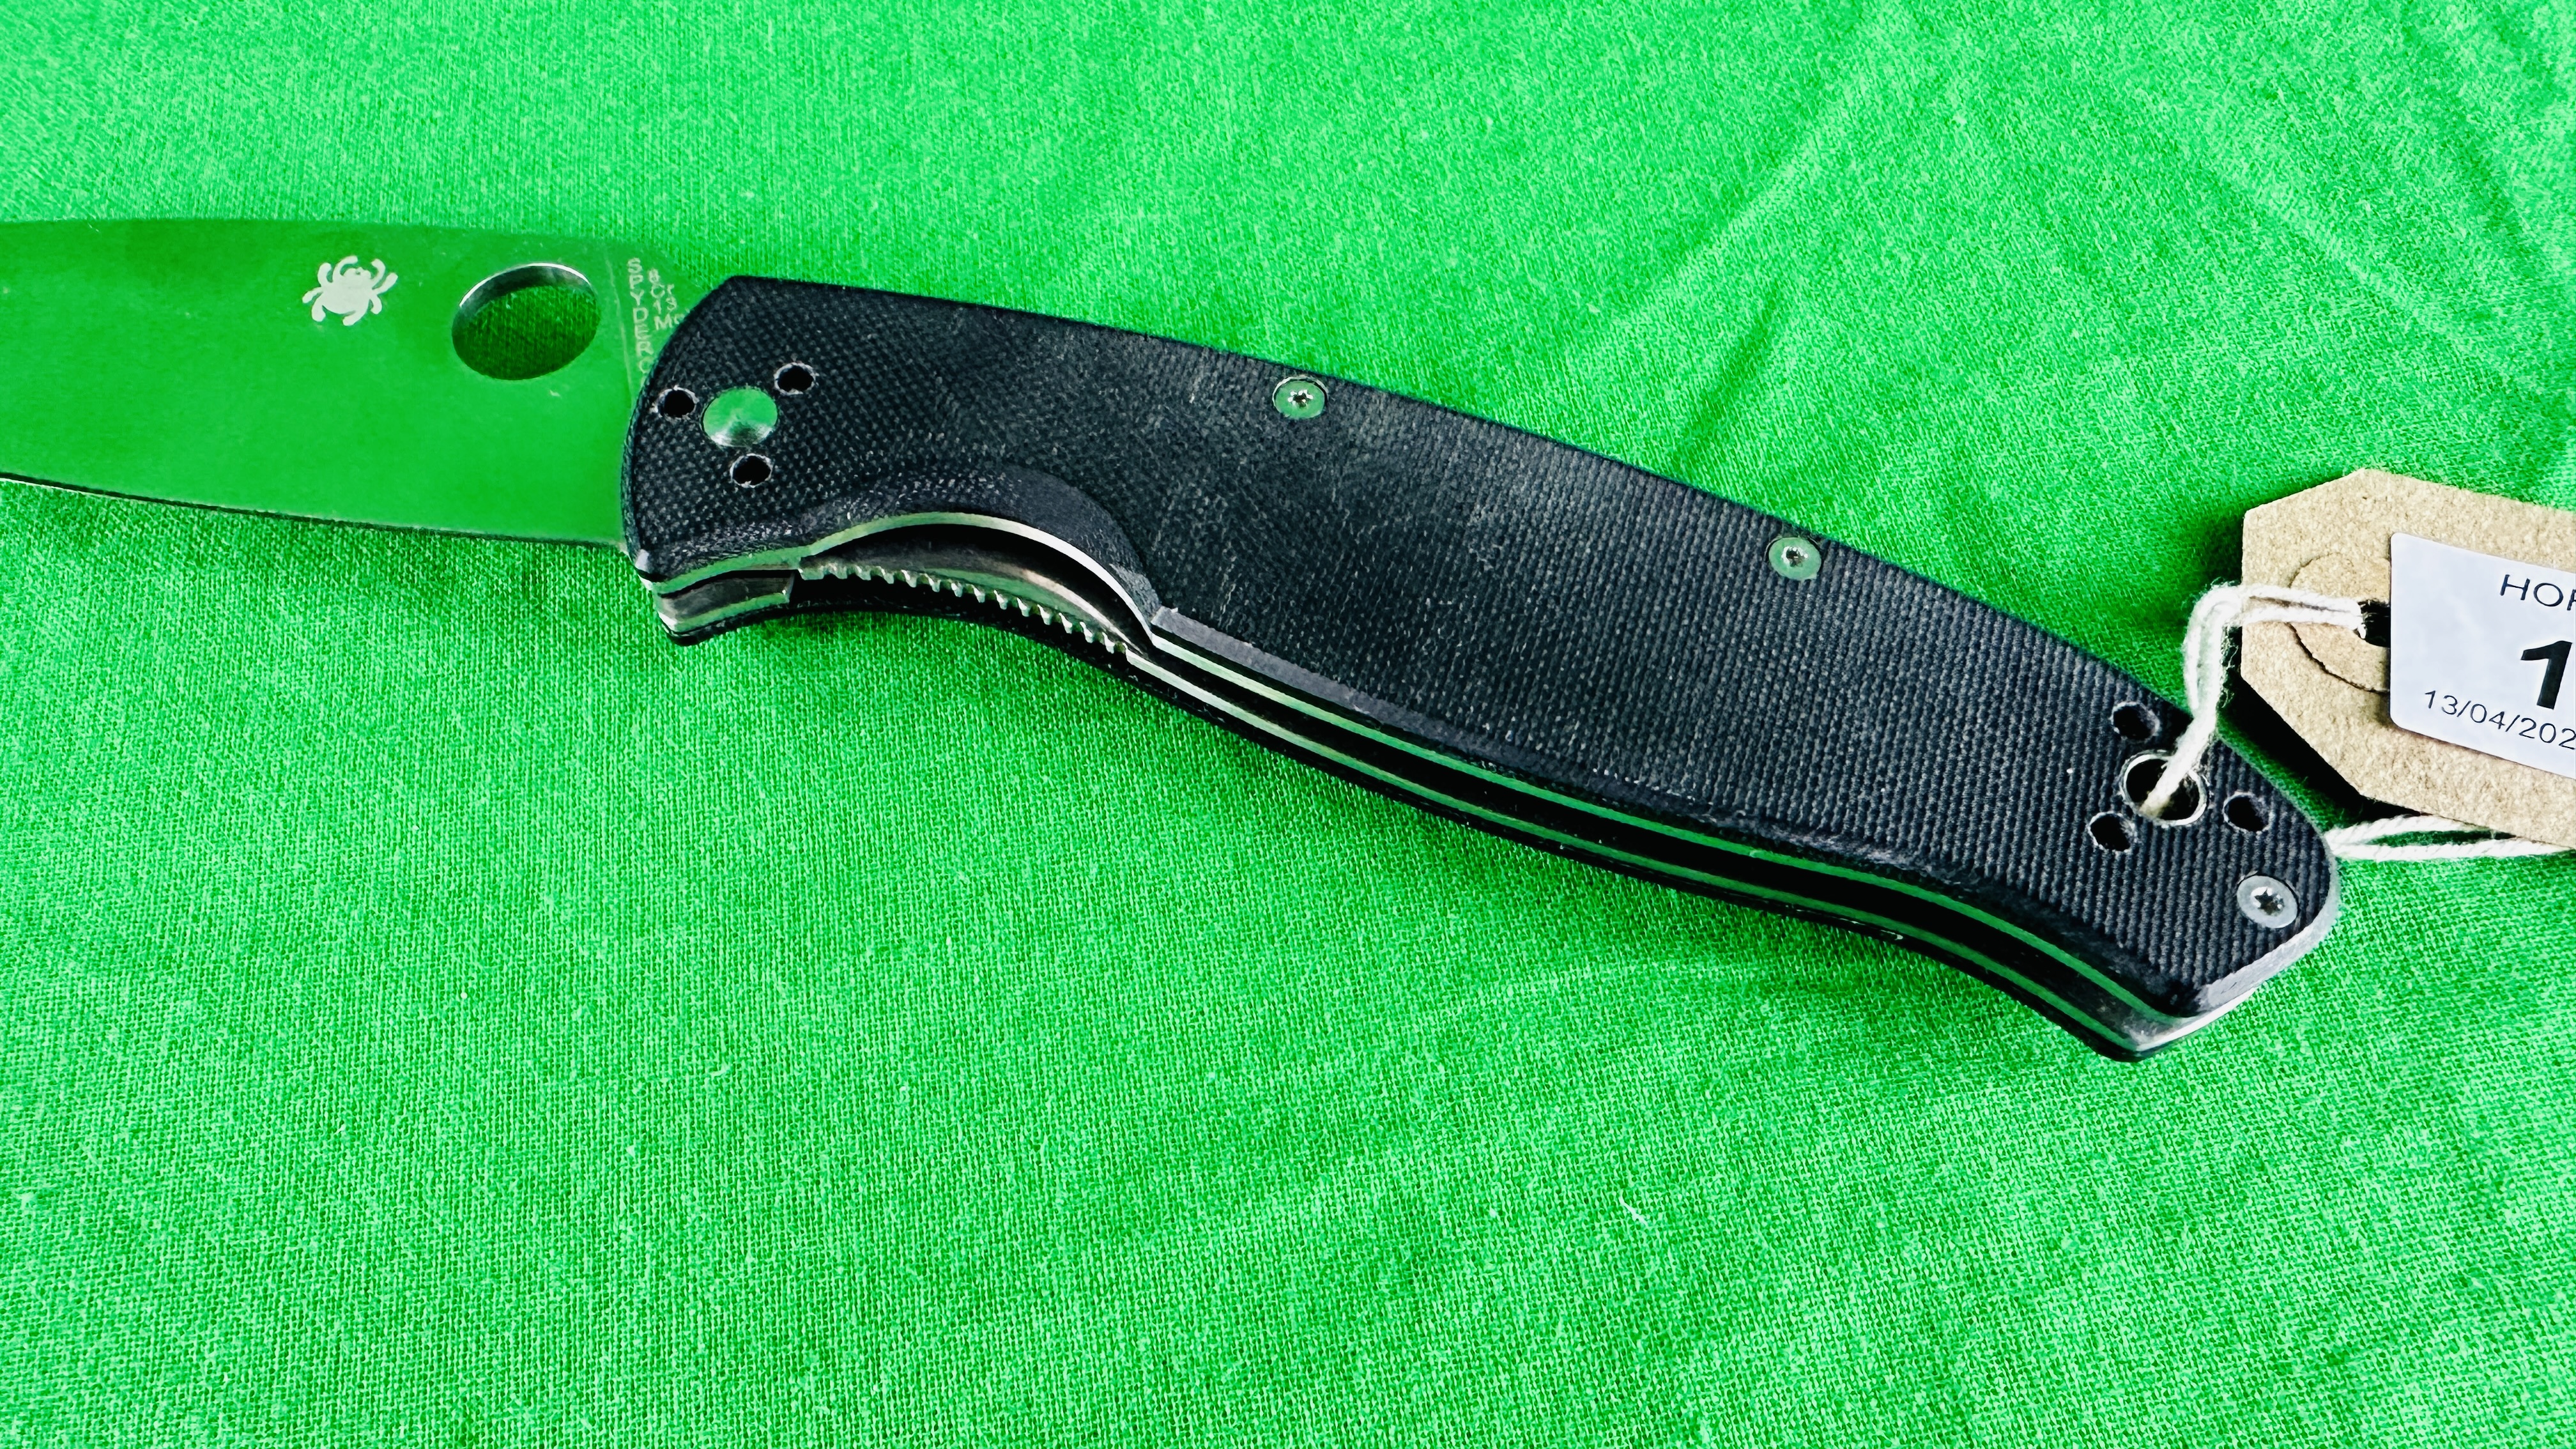 SYDERCO RESILIENCE C142GP FOLDING POCKET LOCK KNIFE - NO POSTAGE OR PACKING AVAILABLE - Image 3 of 7